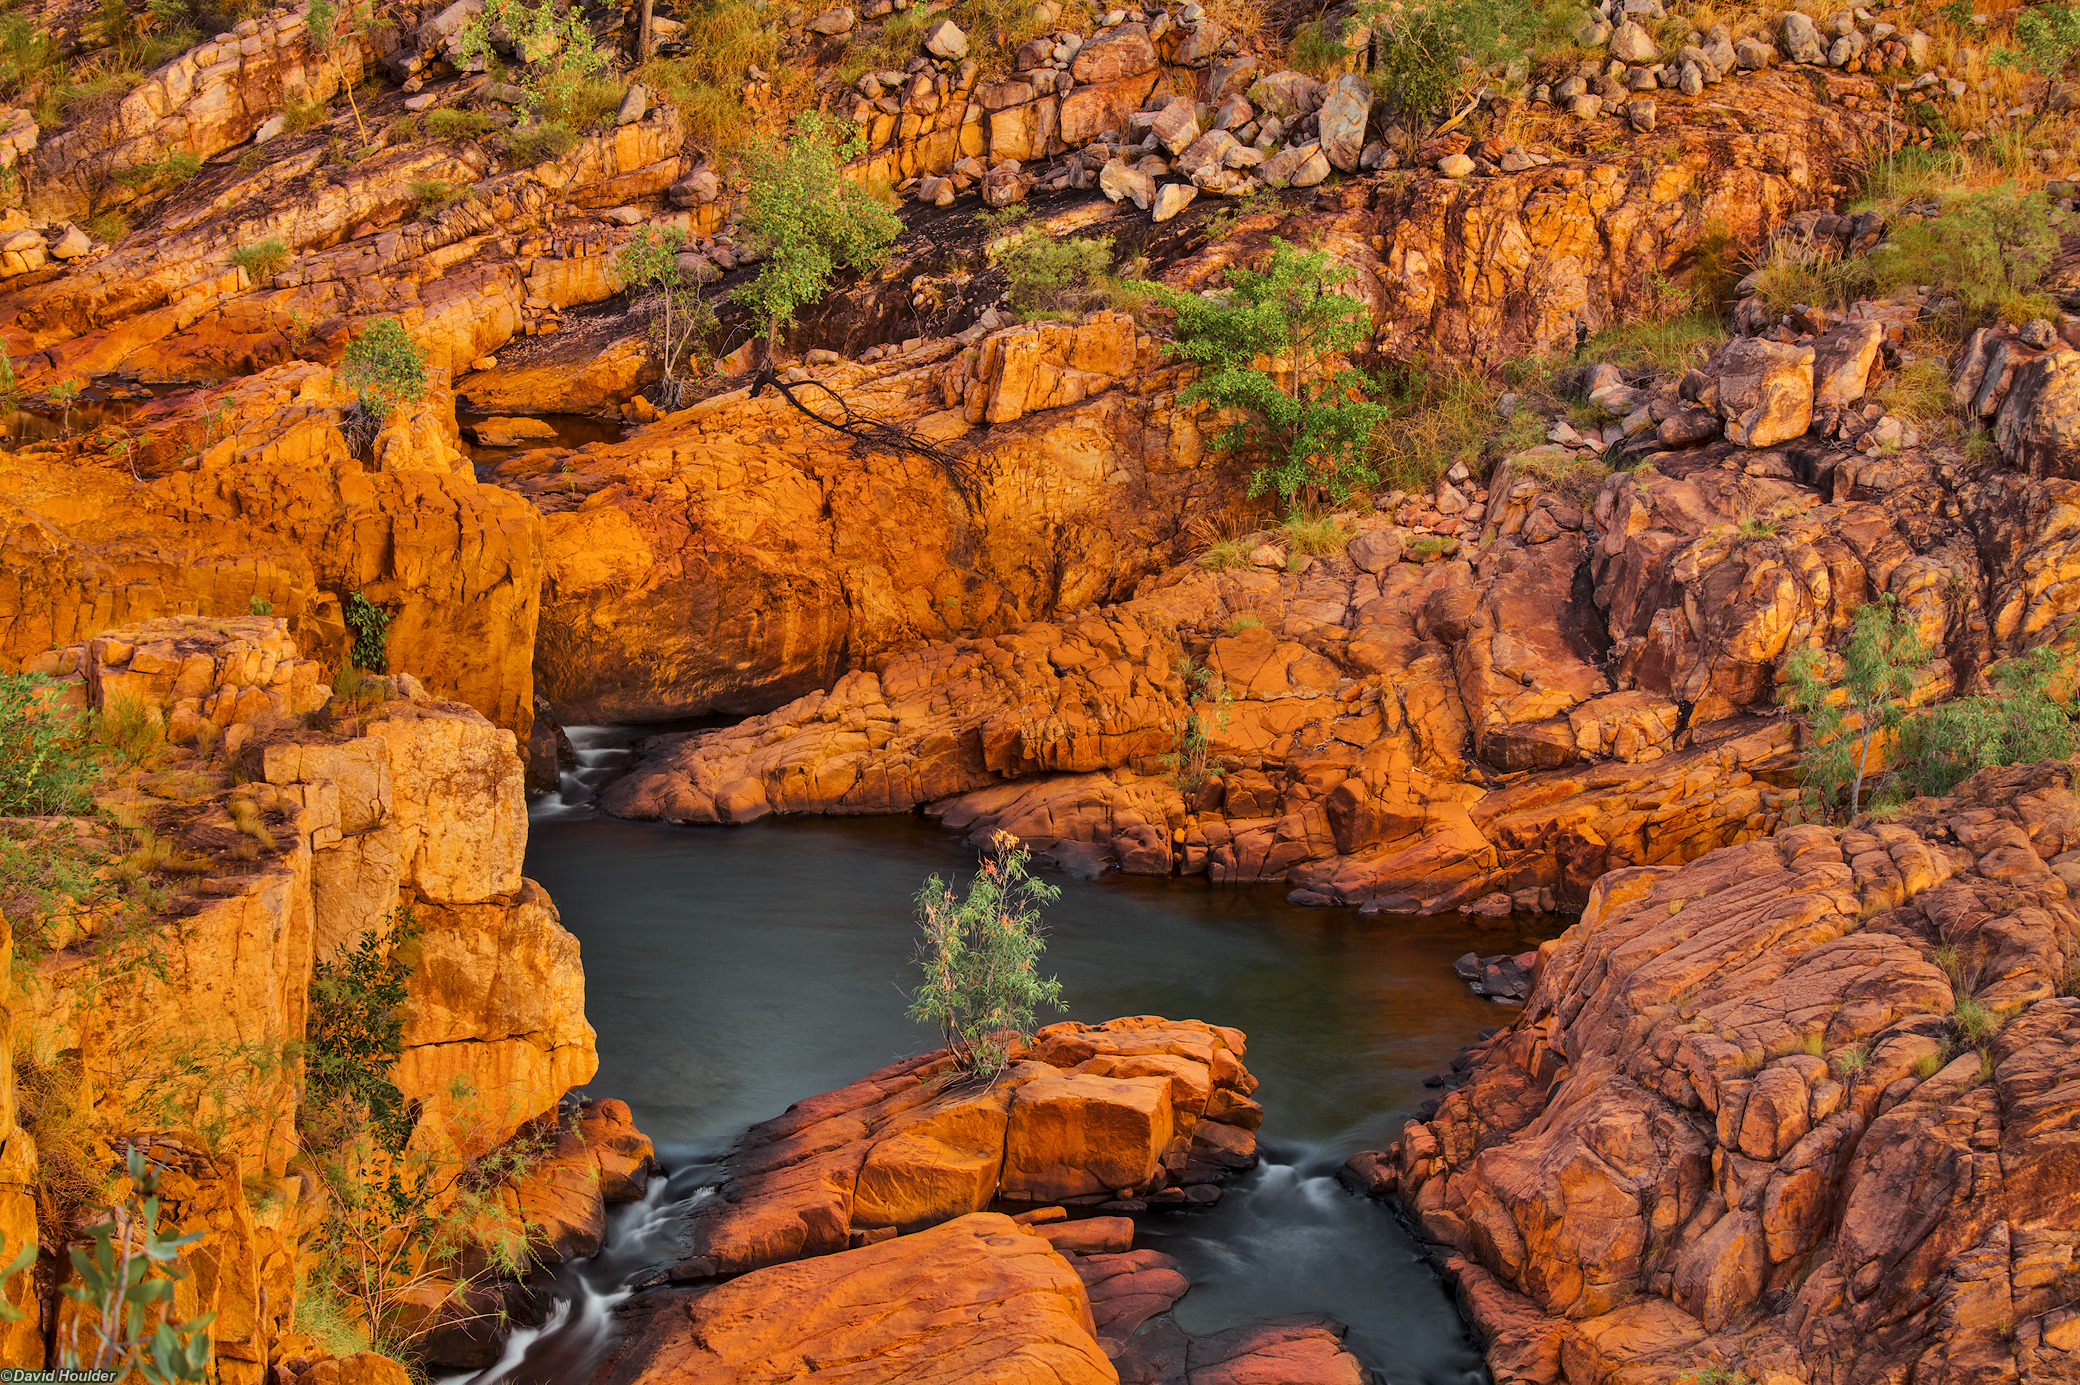 A natural pool surrounded by rocky outcrops and sparse vegetation